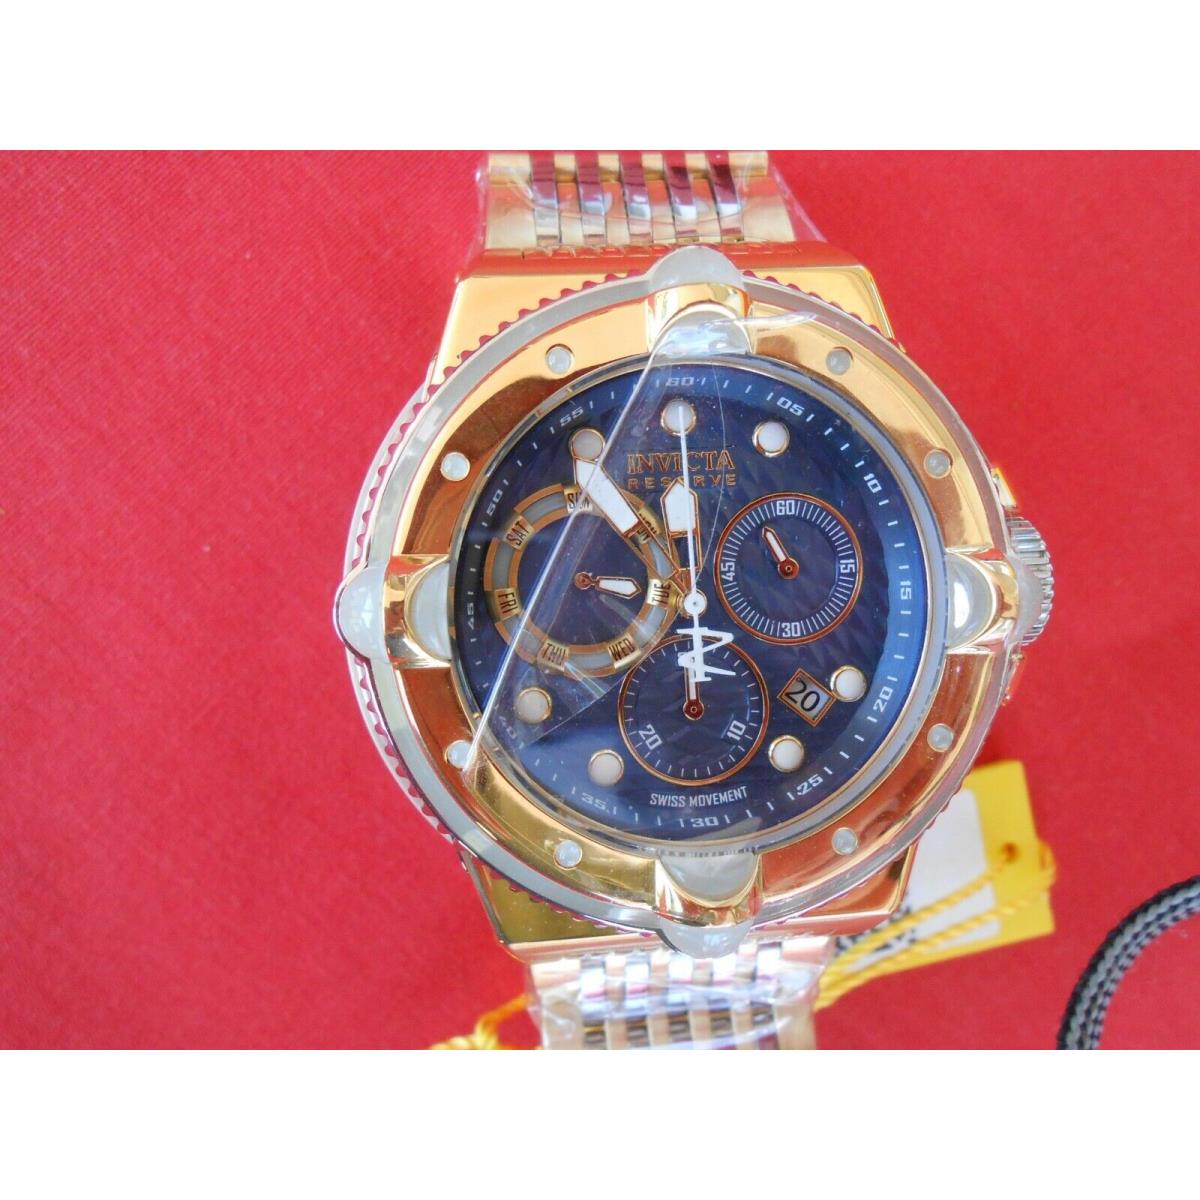 Invicta watch  - Blue Dial, Gold/Silver Band, Multicolor Bezel